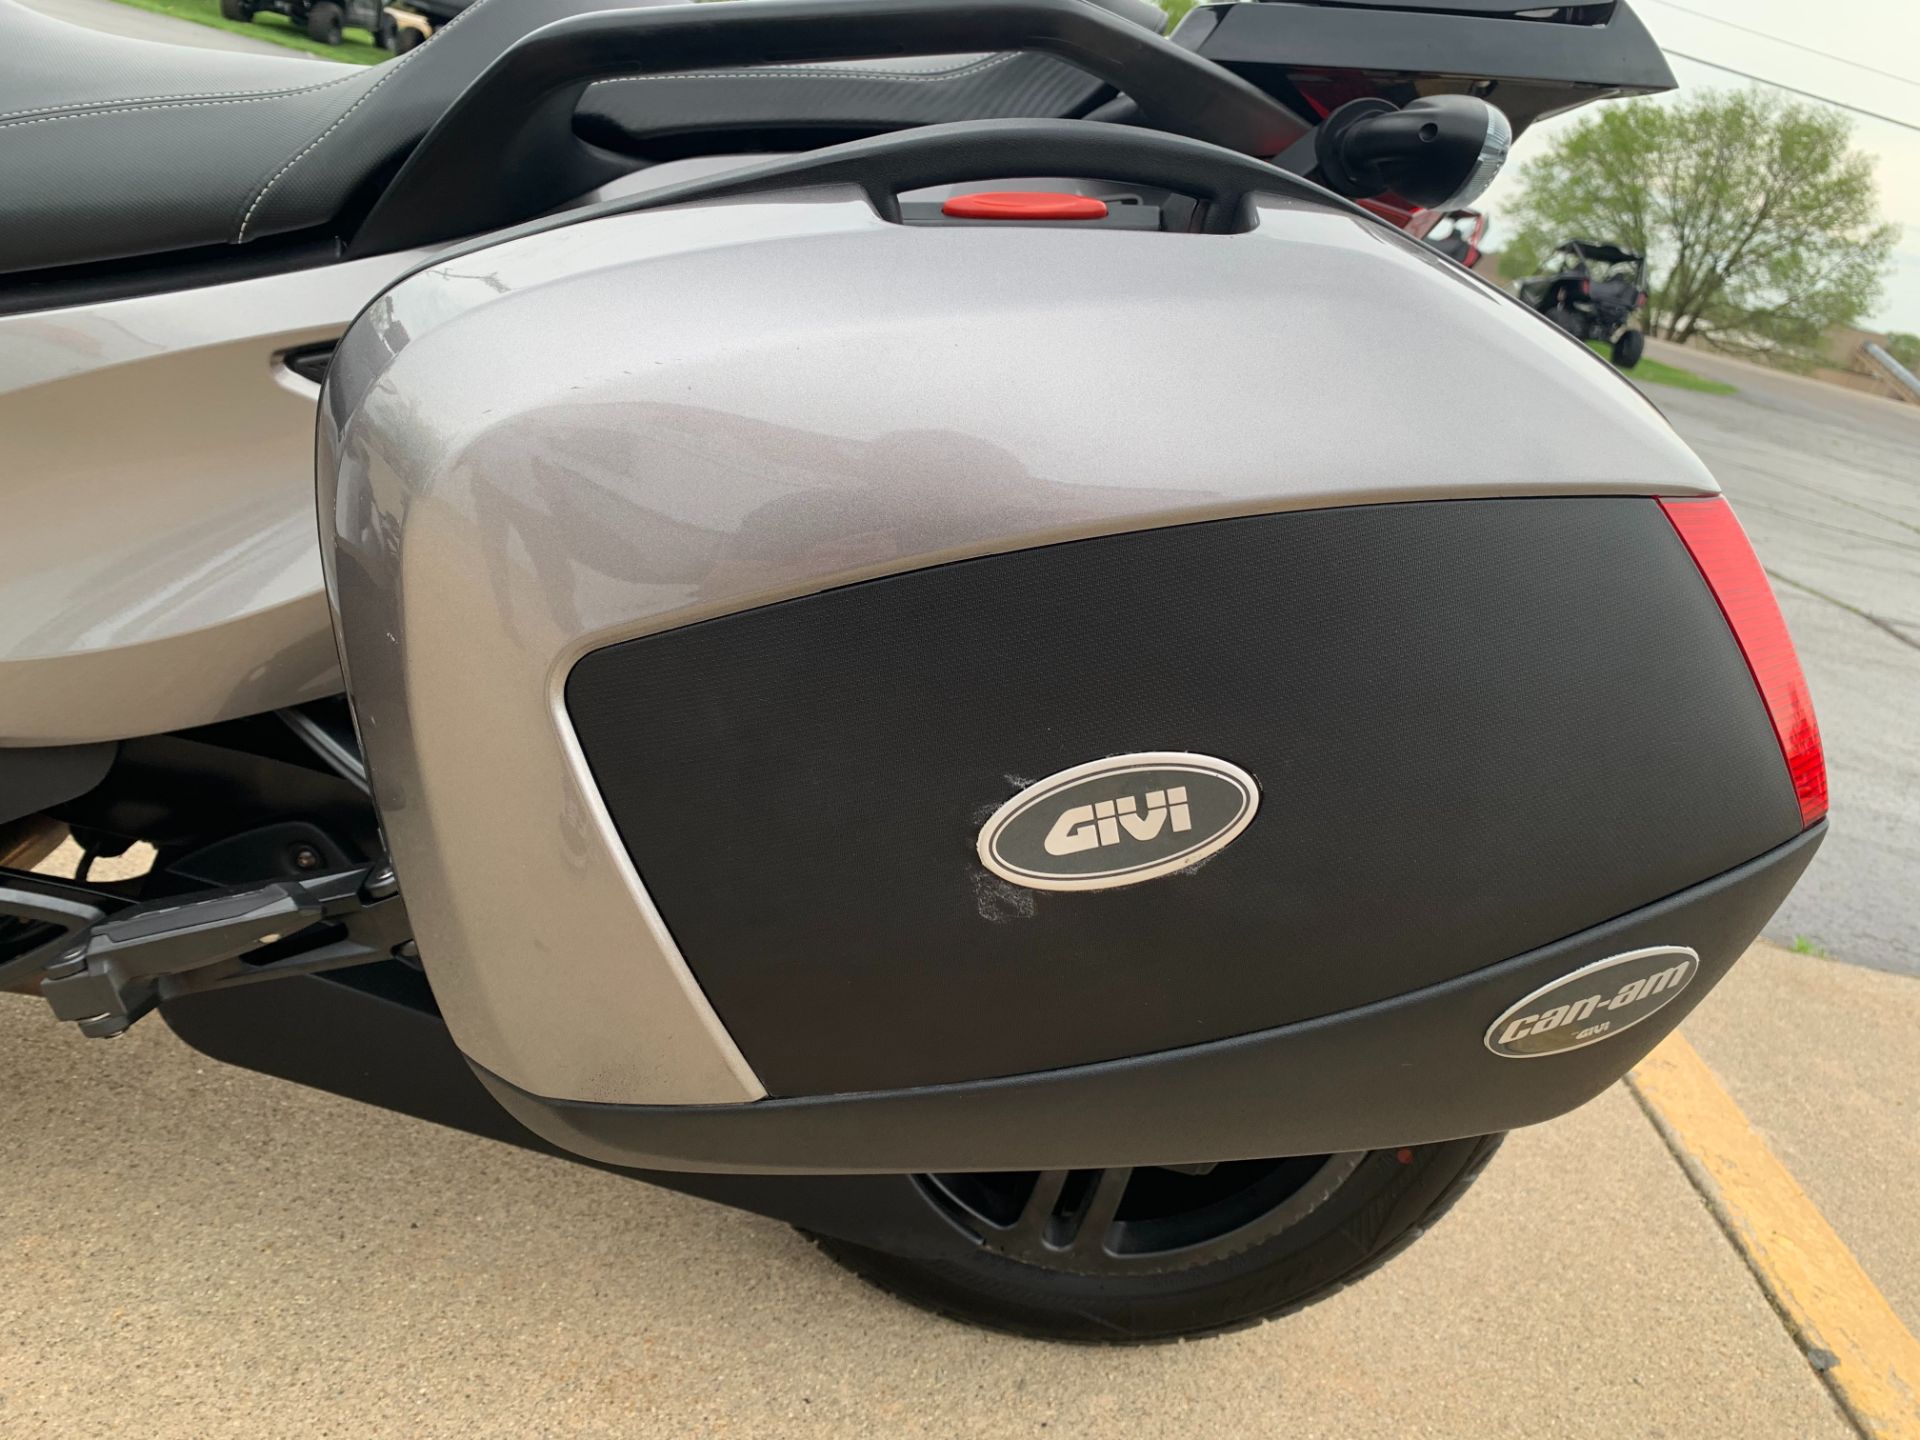 2012 CAN AM SPYDER RS-S SE5 in Freeport, Illinois - Photo 7